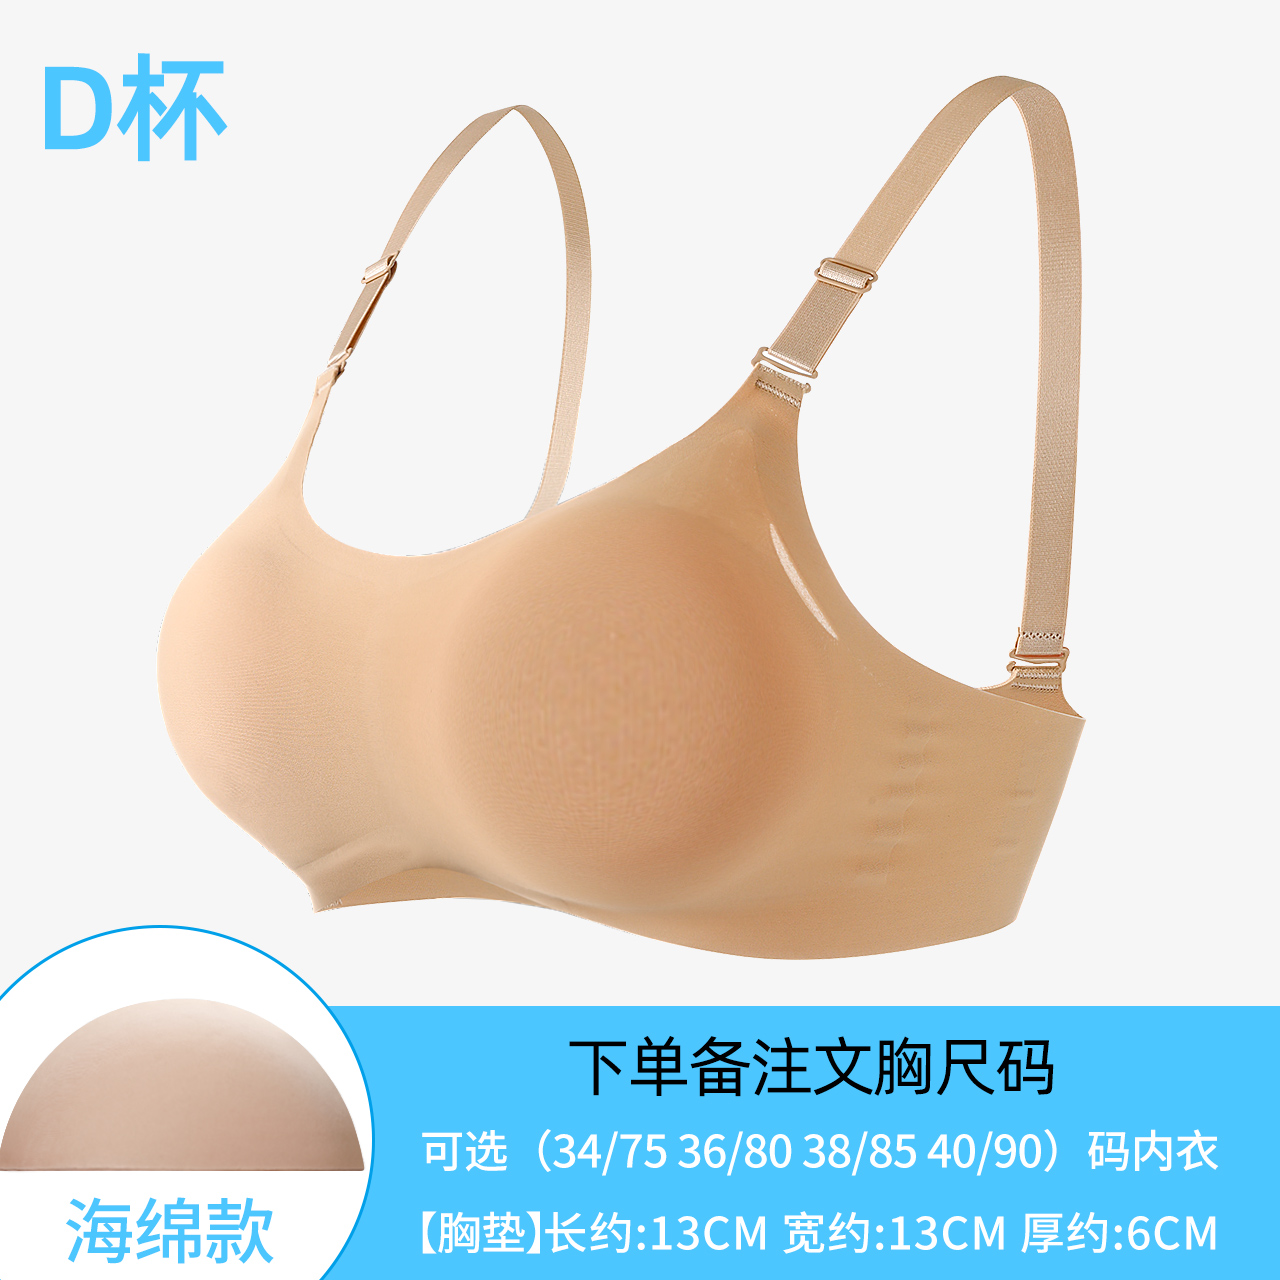 Fake Simulated Breast Silicone Huge Boobs A/B/C/D/E/G/H Cup